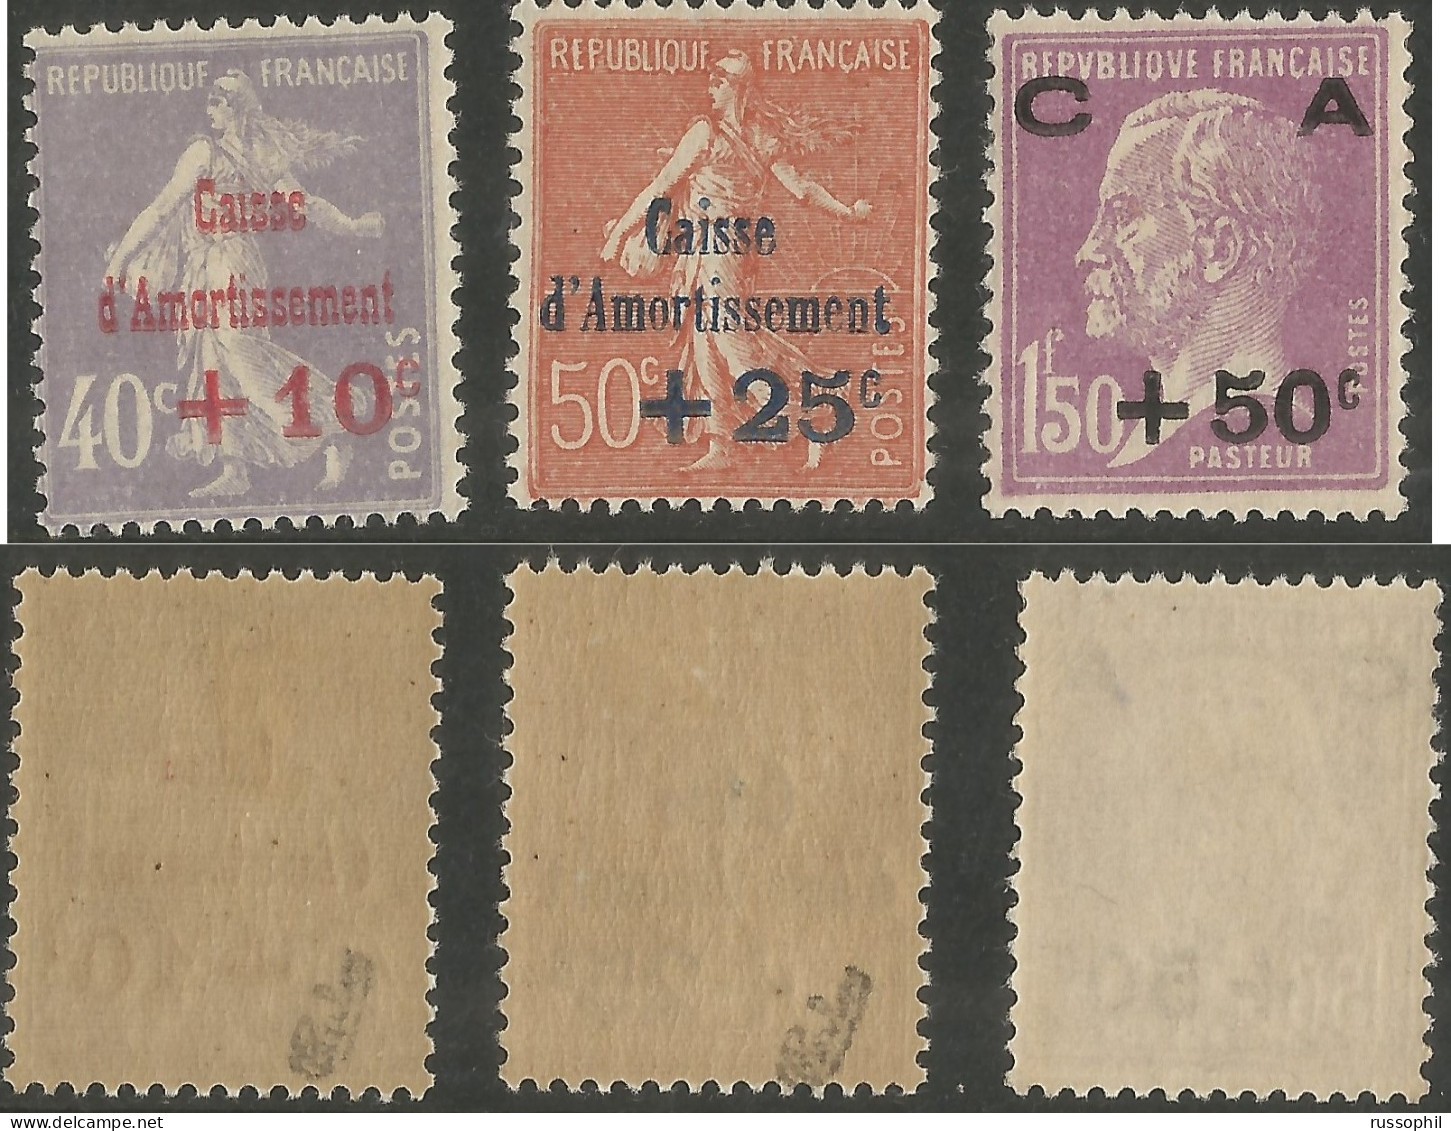 FRANCE - CAISSE D'AMORTISSEMENT - Yv. # 249 TO #251 - YV. #249 AND #250 (MH *) CALVES -  Yv 251 (MNH **) - 1928 - 1927-31 Caisse D'Amortissement